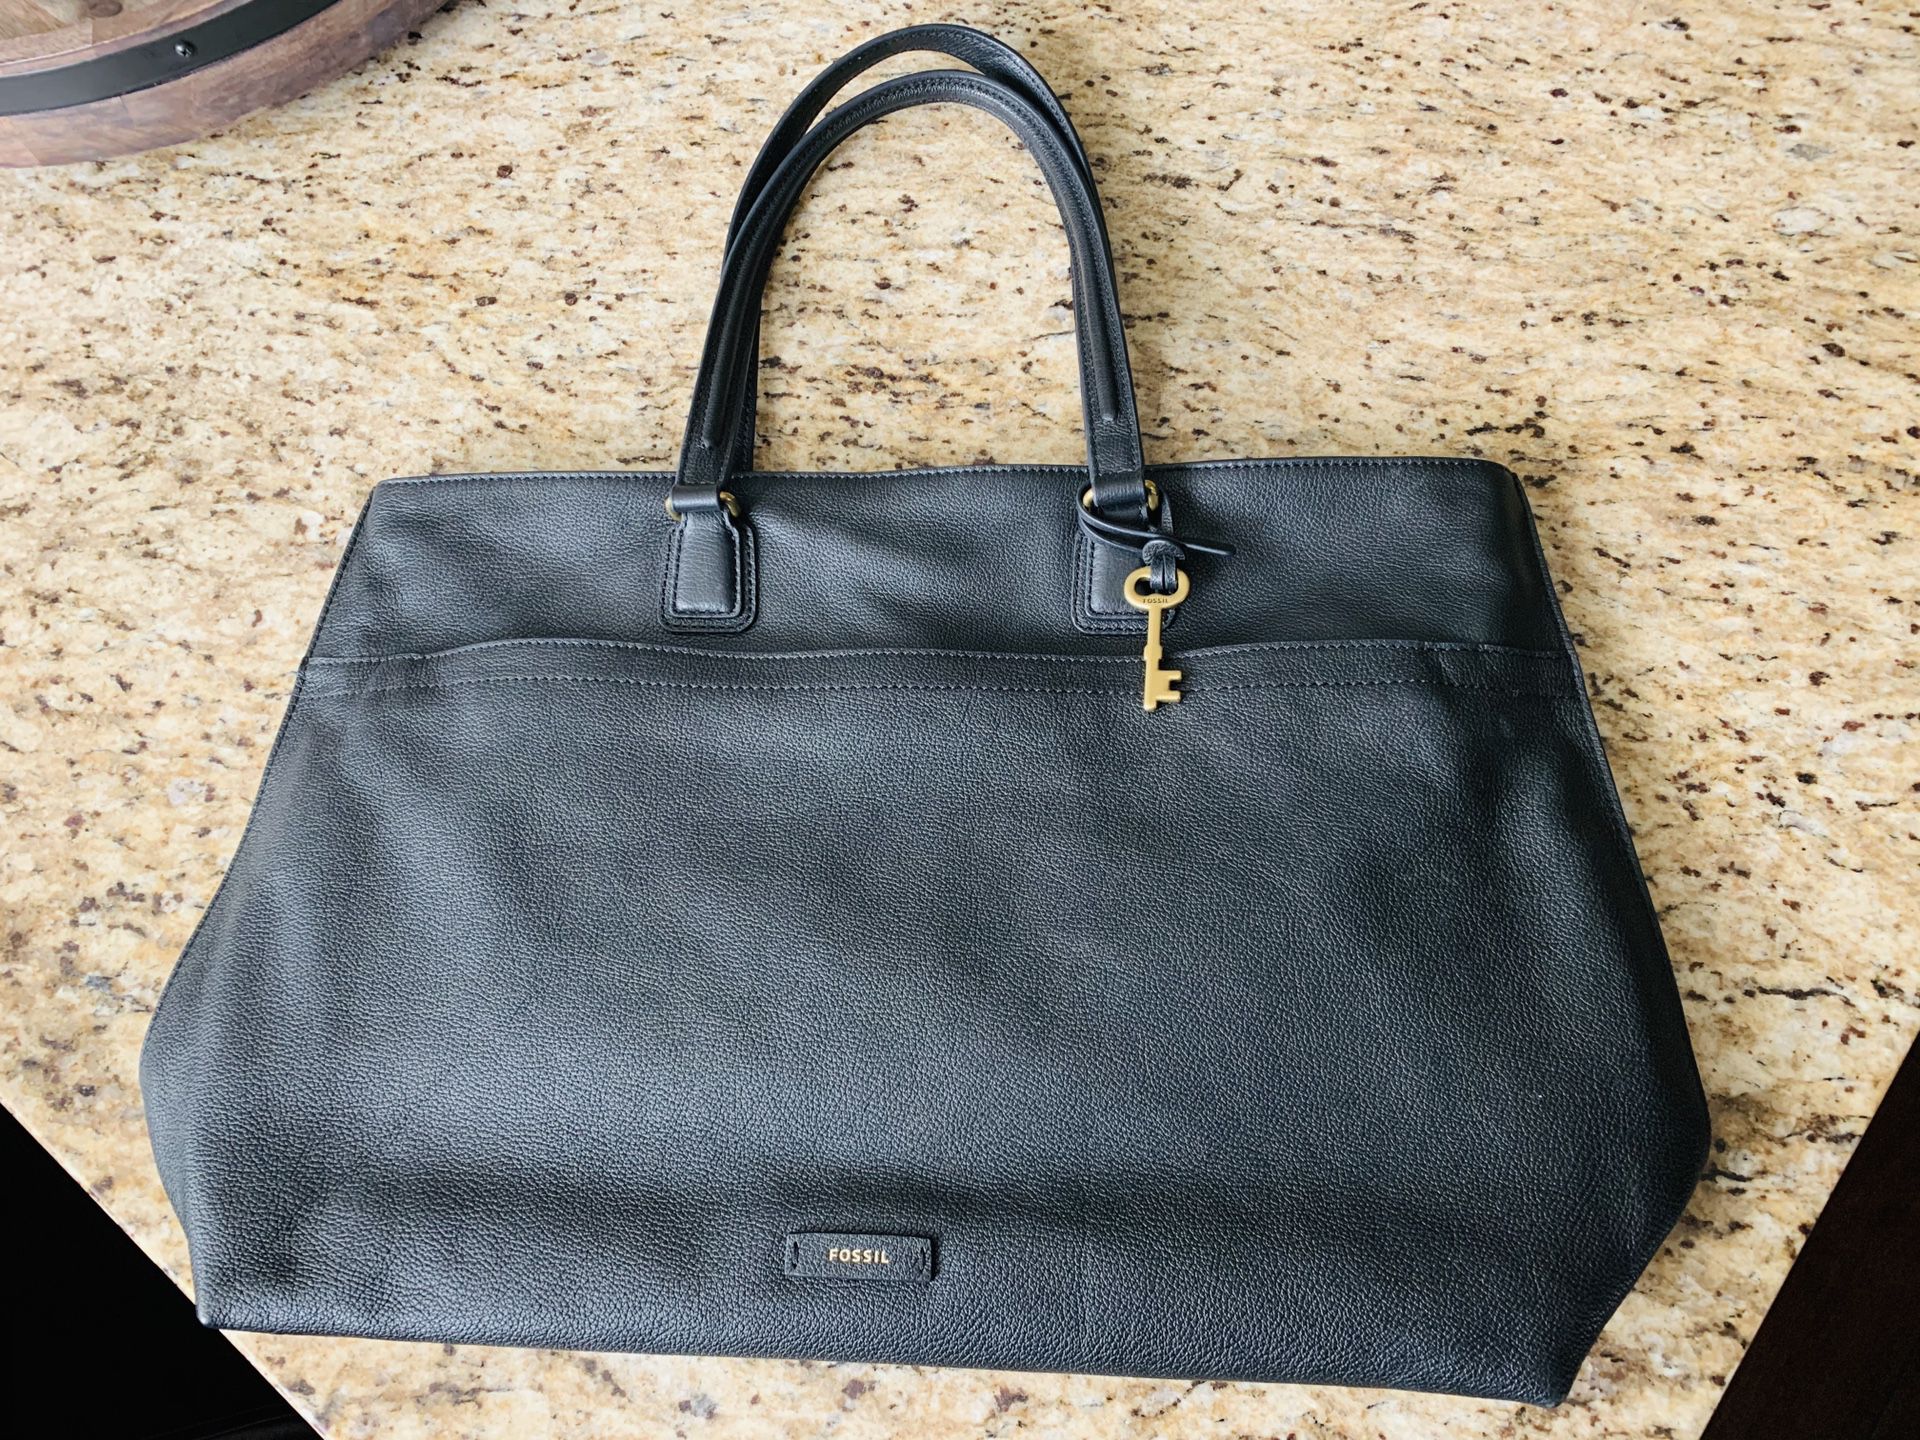 New Fossil Brand Soft Black Leather Tote Bag